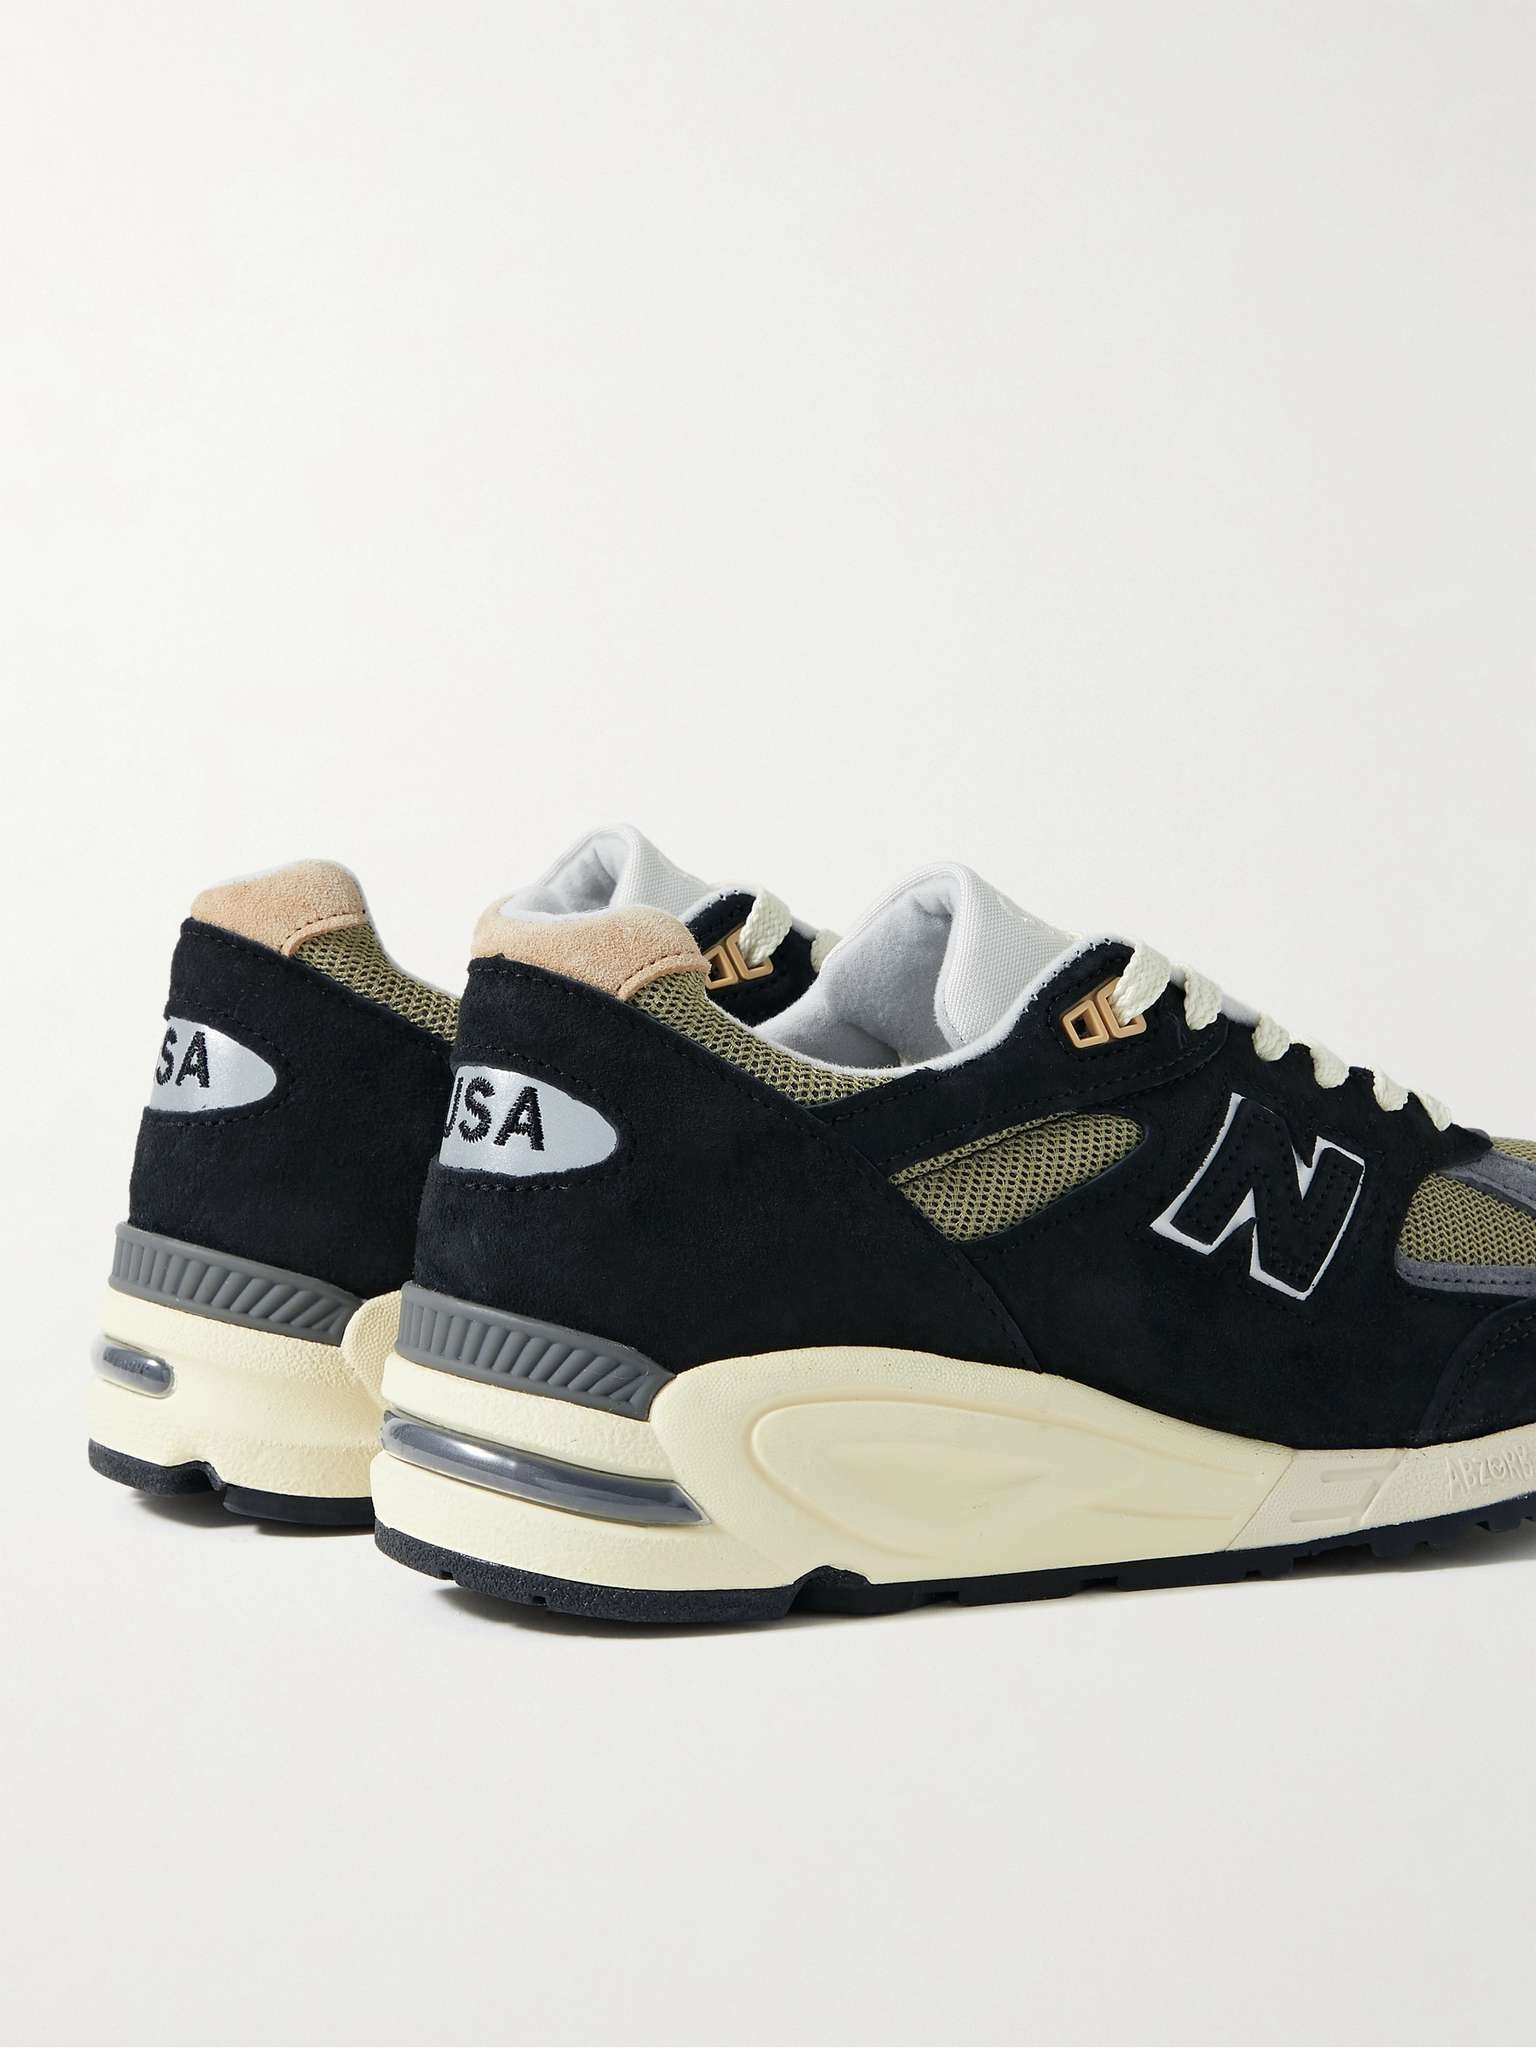 M990 Suede, Mesh and Canvas Sneakers - 5